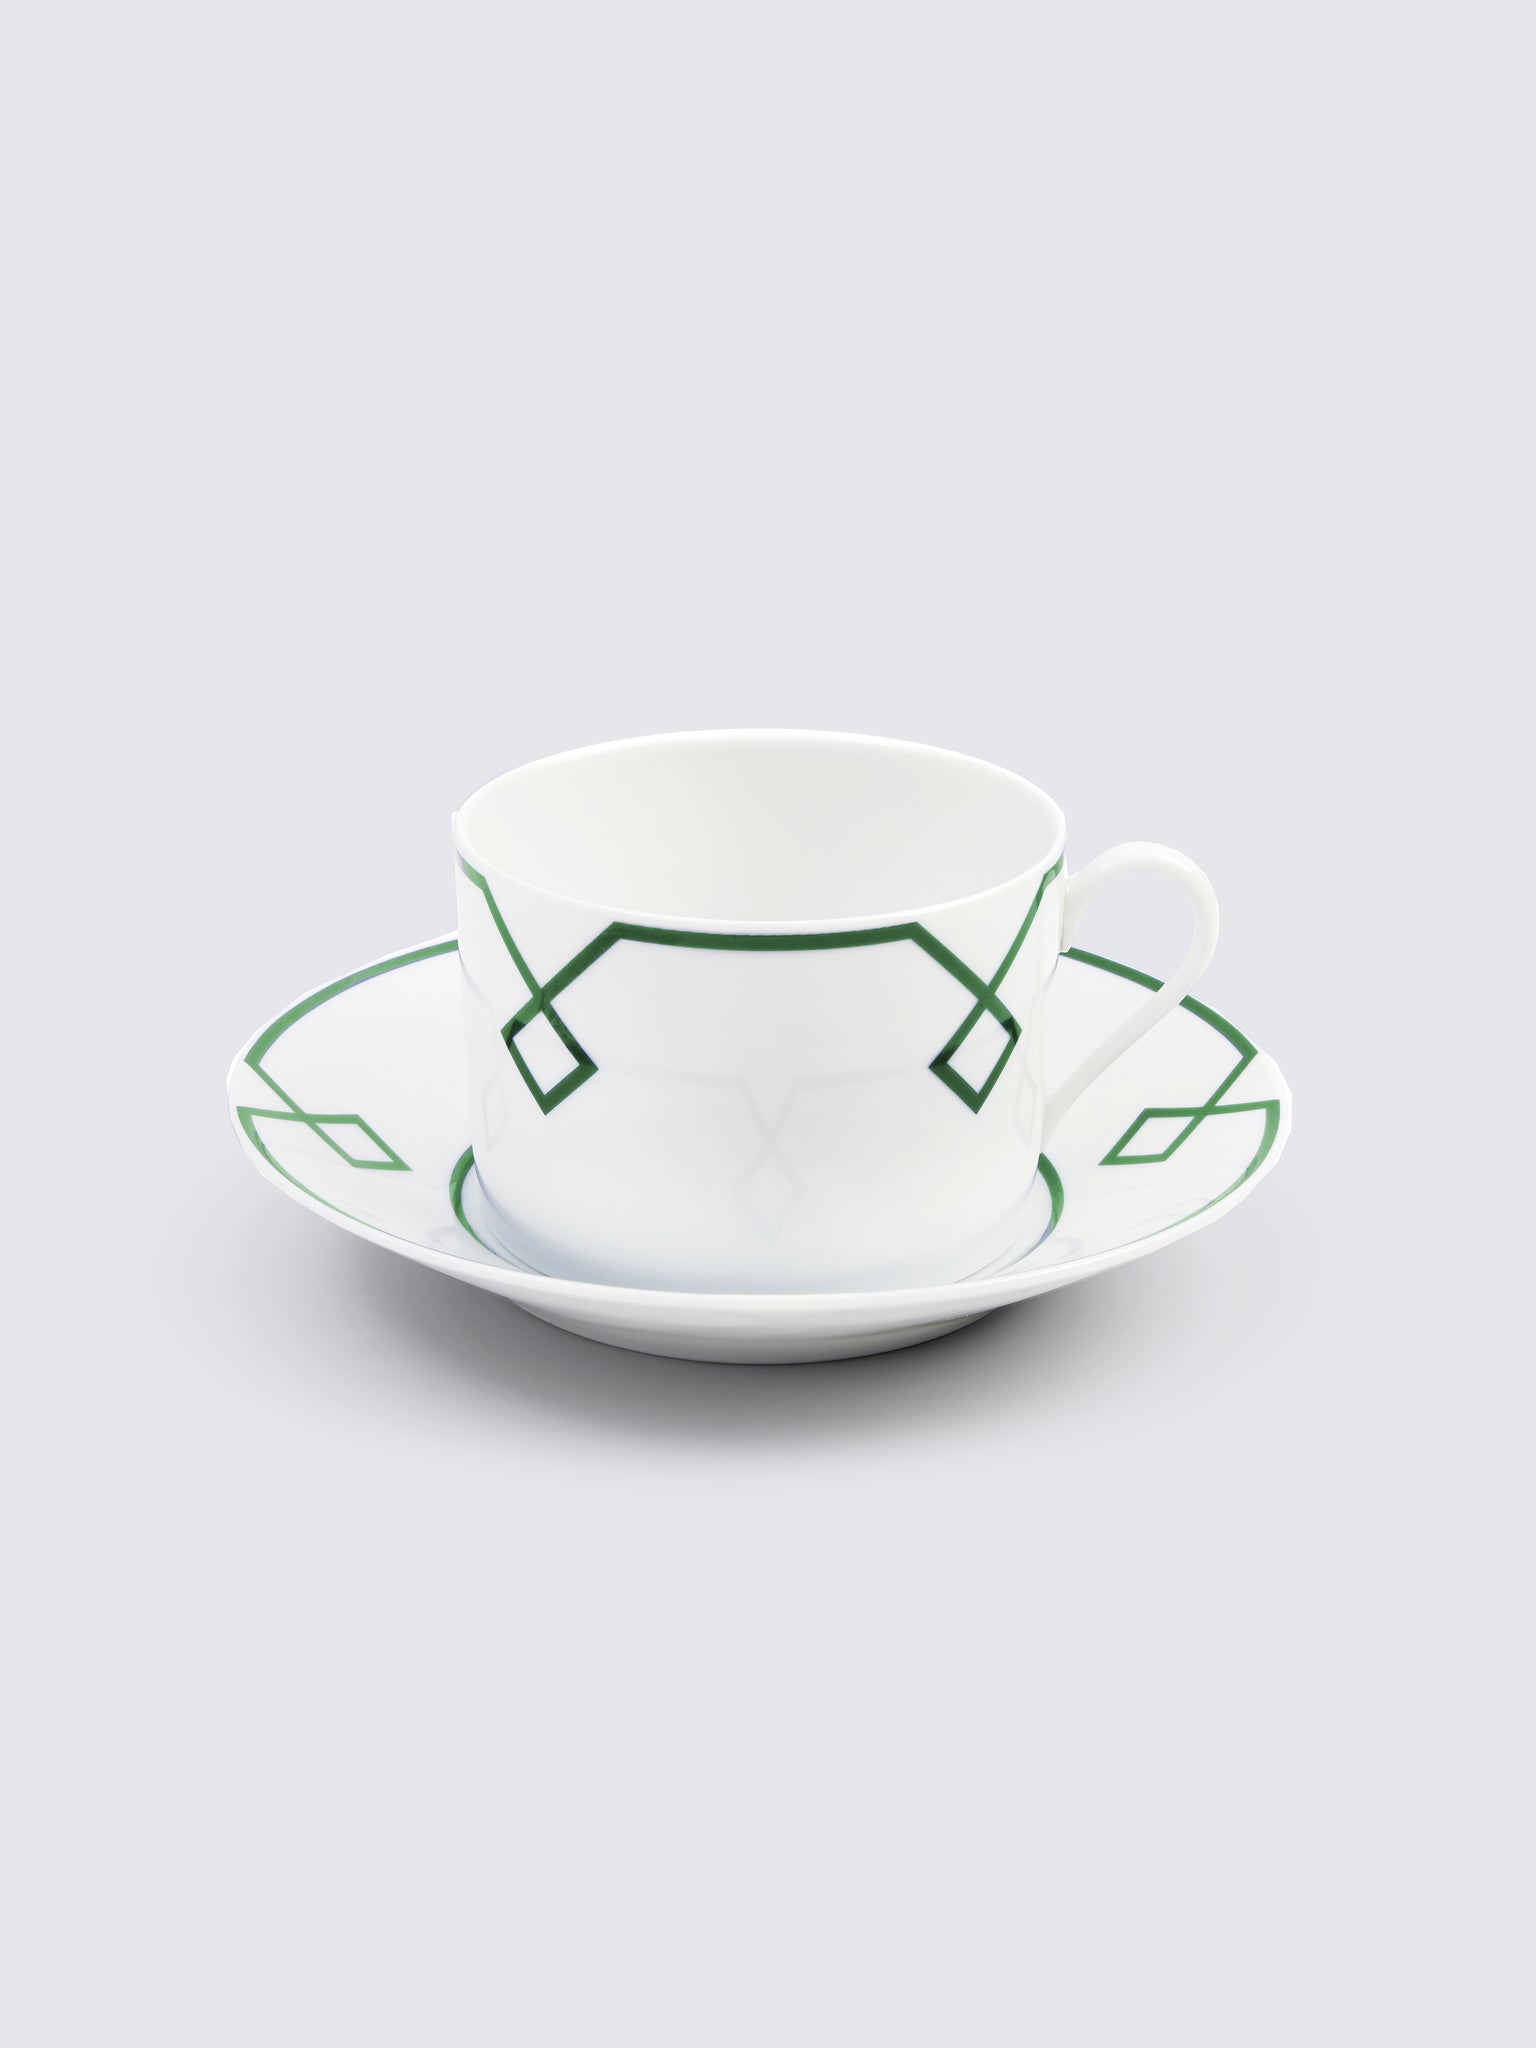 Naples Tea Cup and Saucer with Green Geometric Border